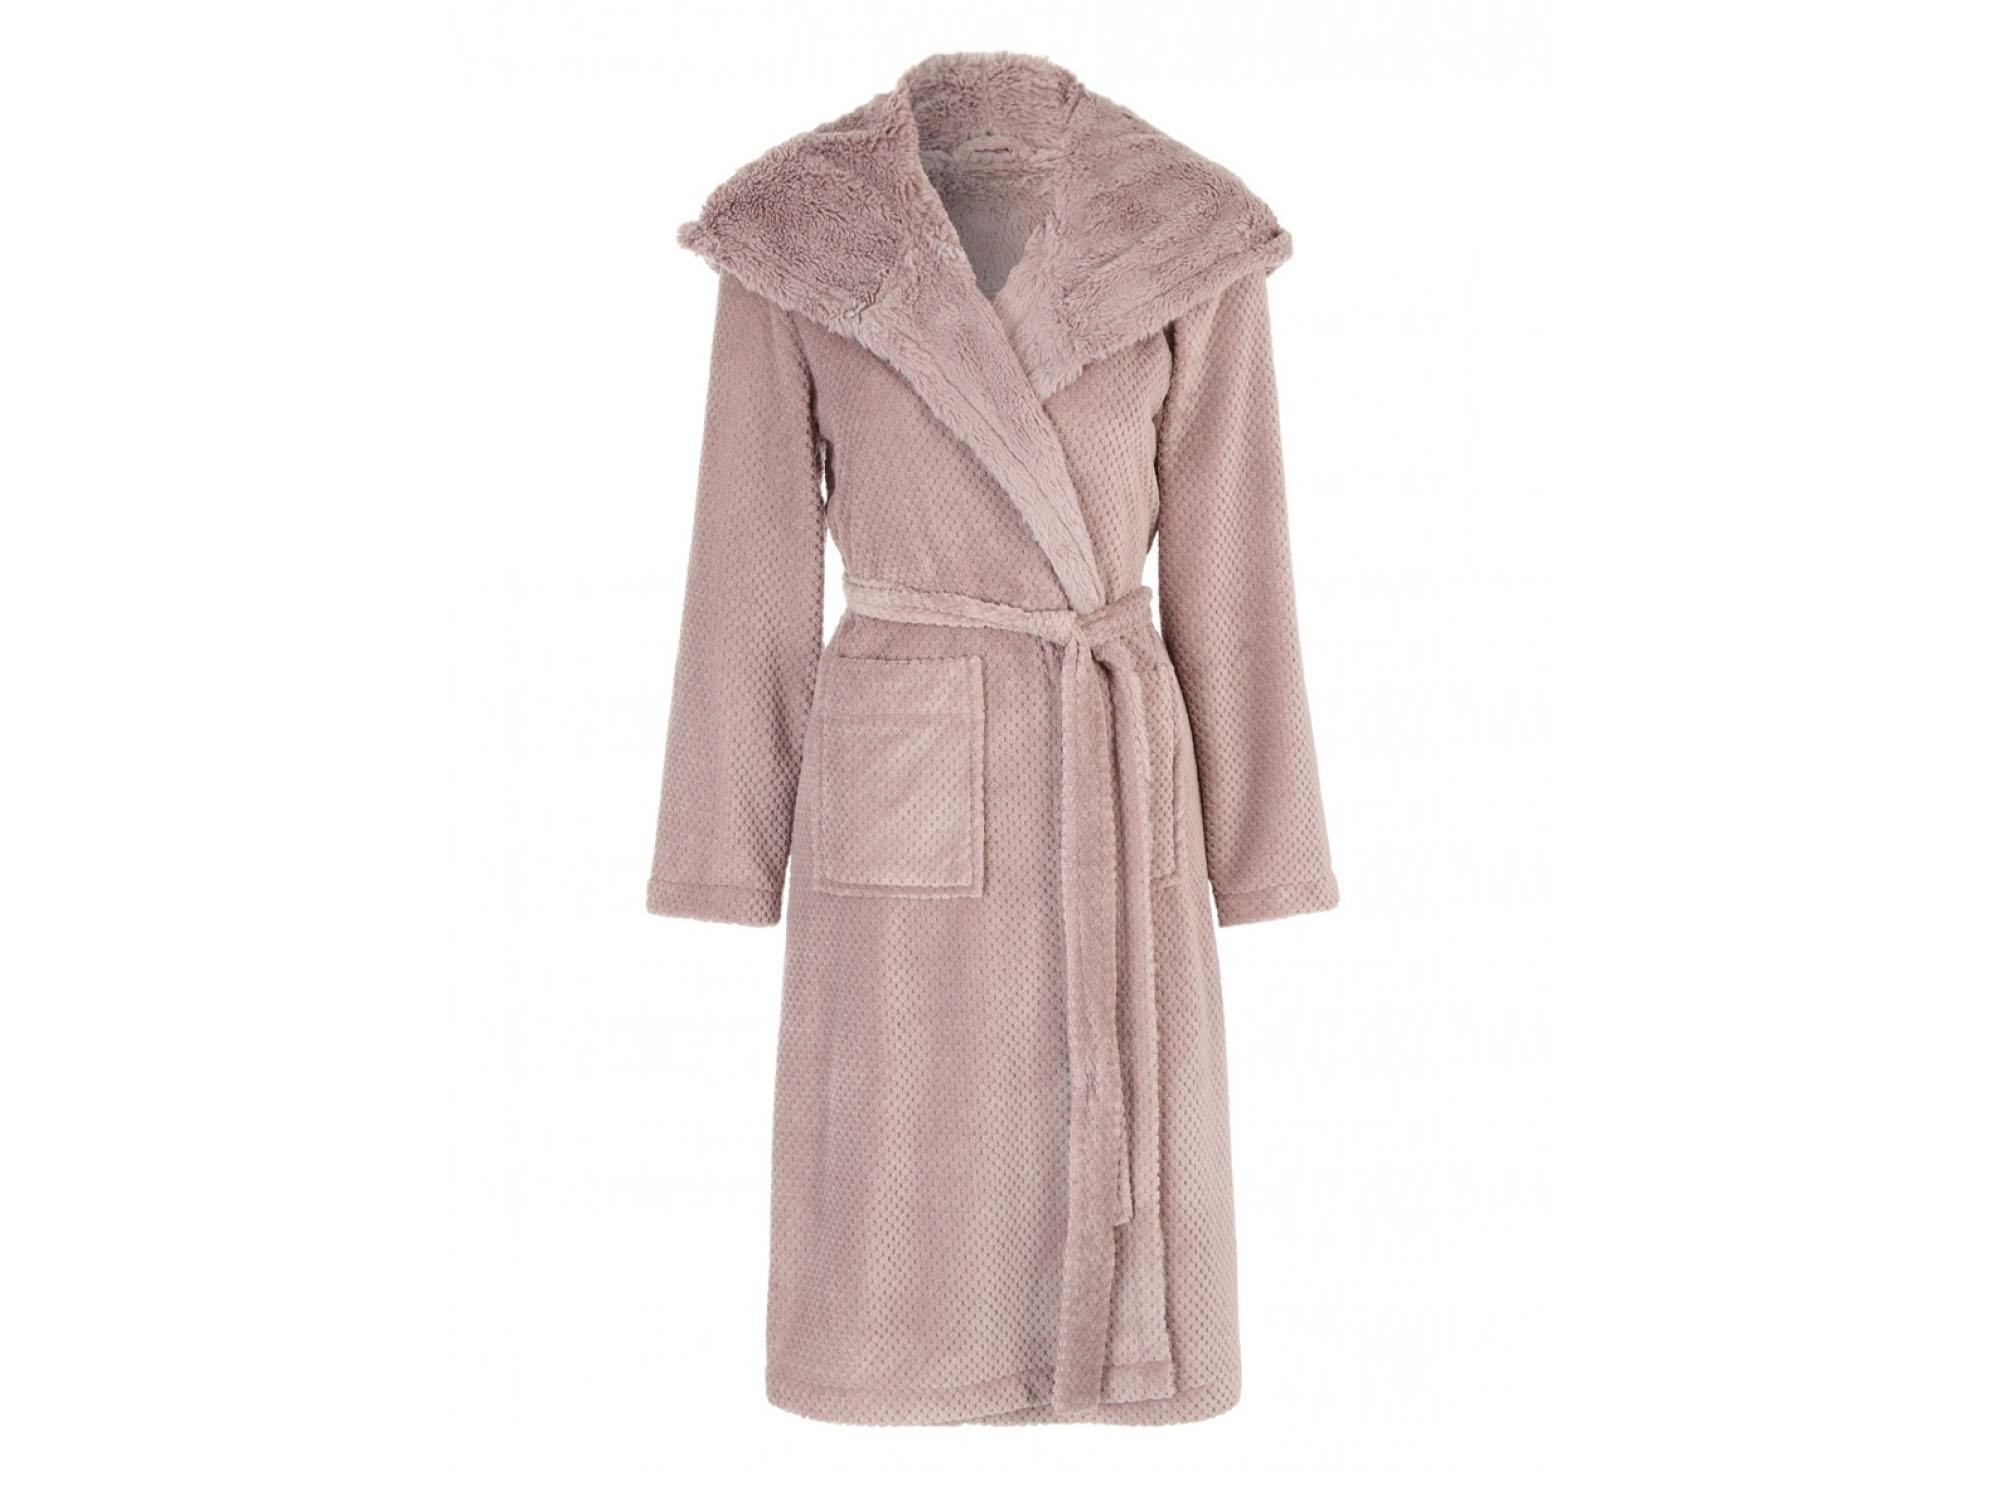 The Bohemian Dressing Gown reflects the best we have to offer: